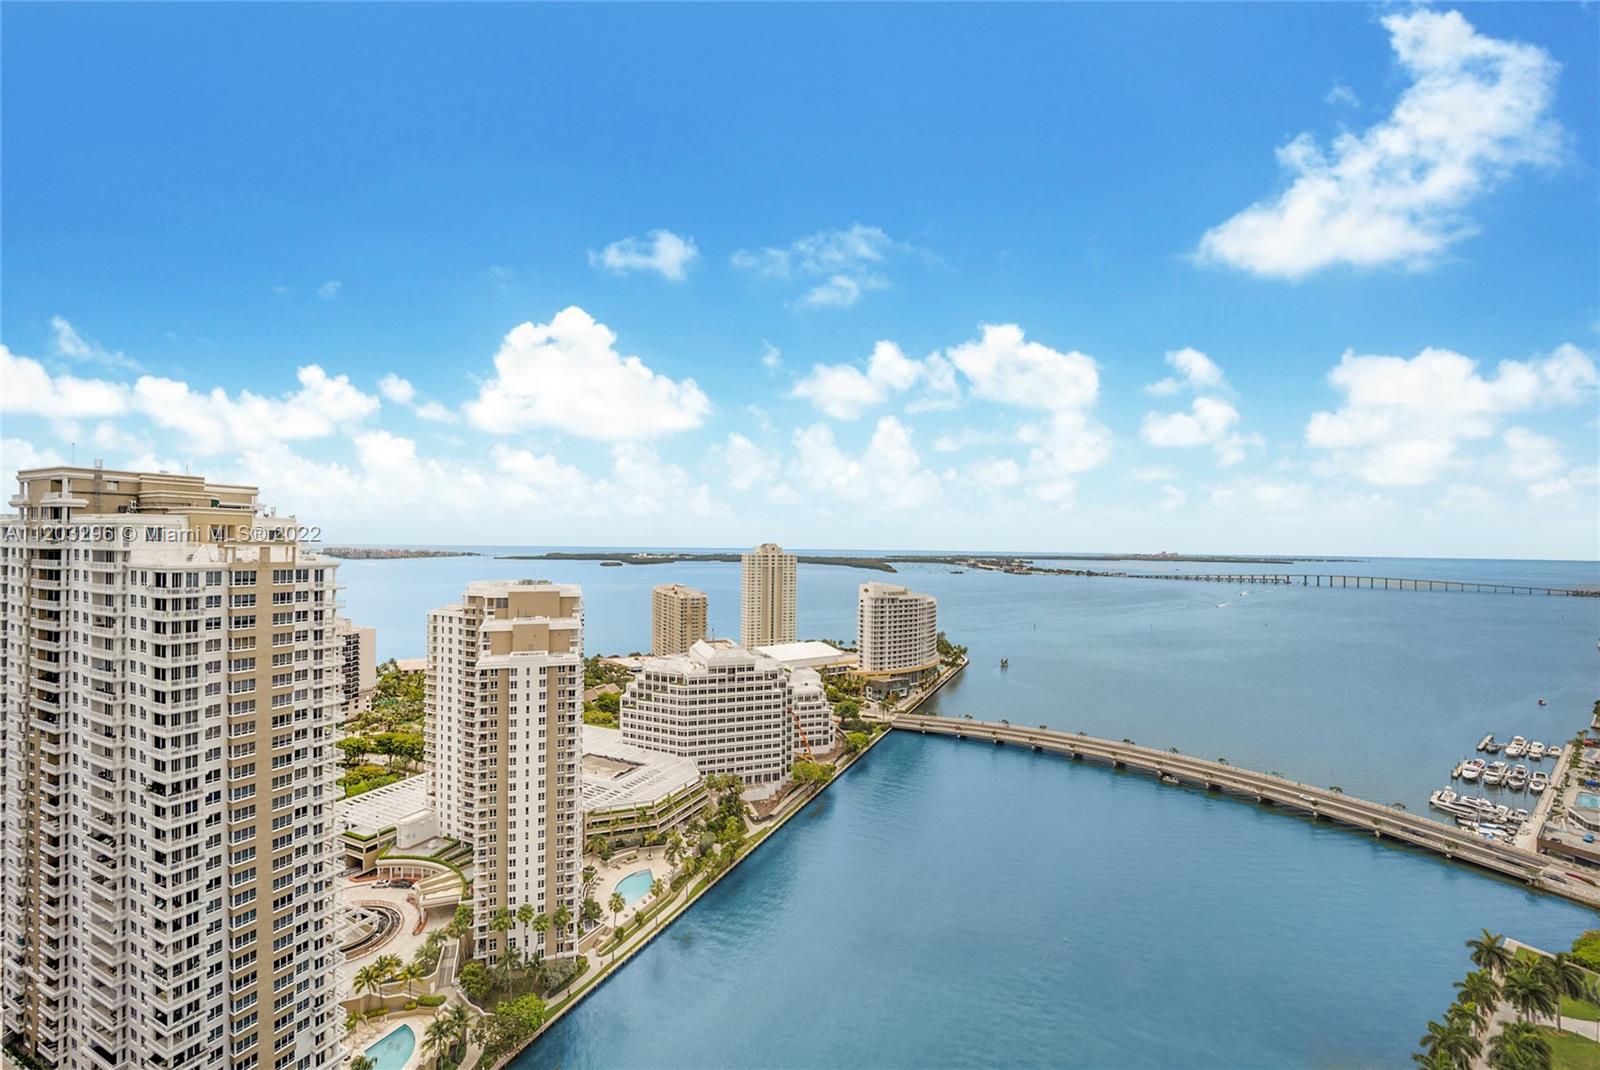 Corner apartment on 31st Floor with direct water views, 2 Bed / 2 Bath + Large DEN, at Icon Brickell